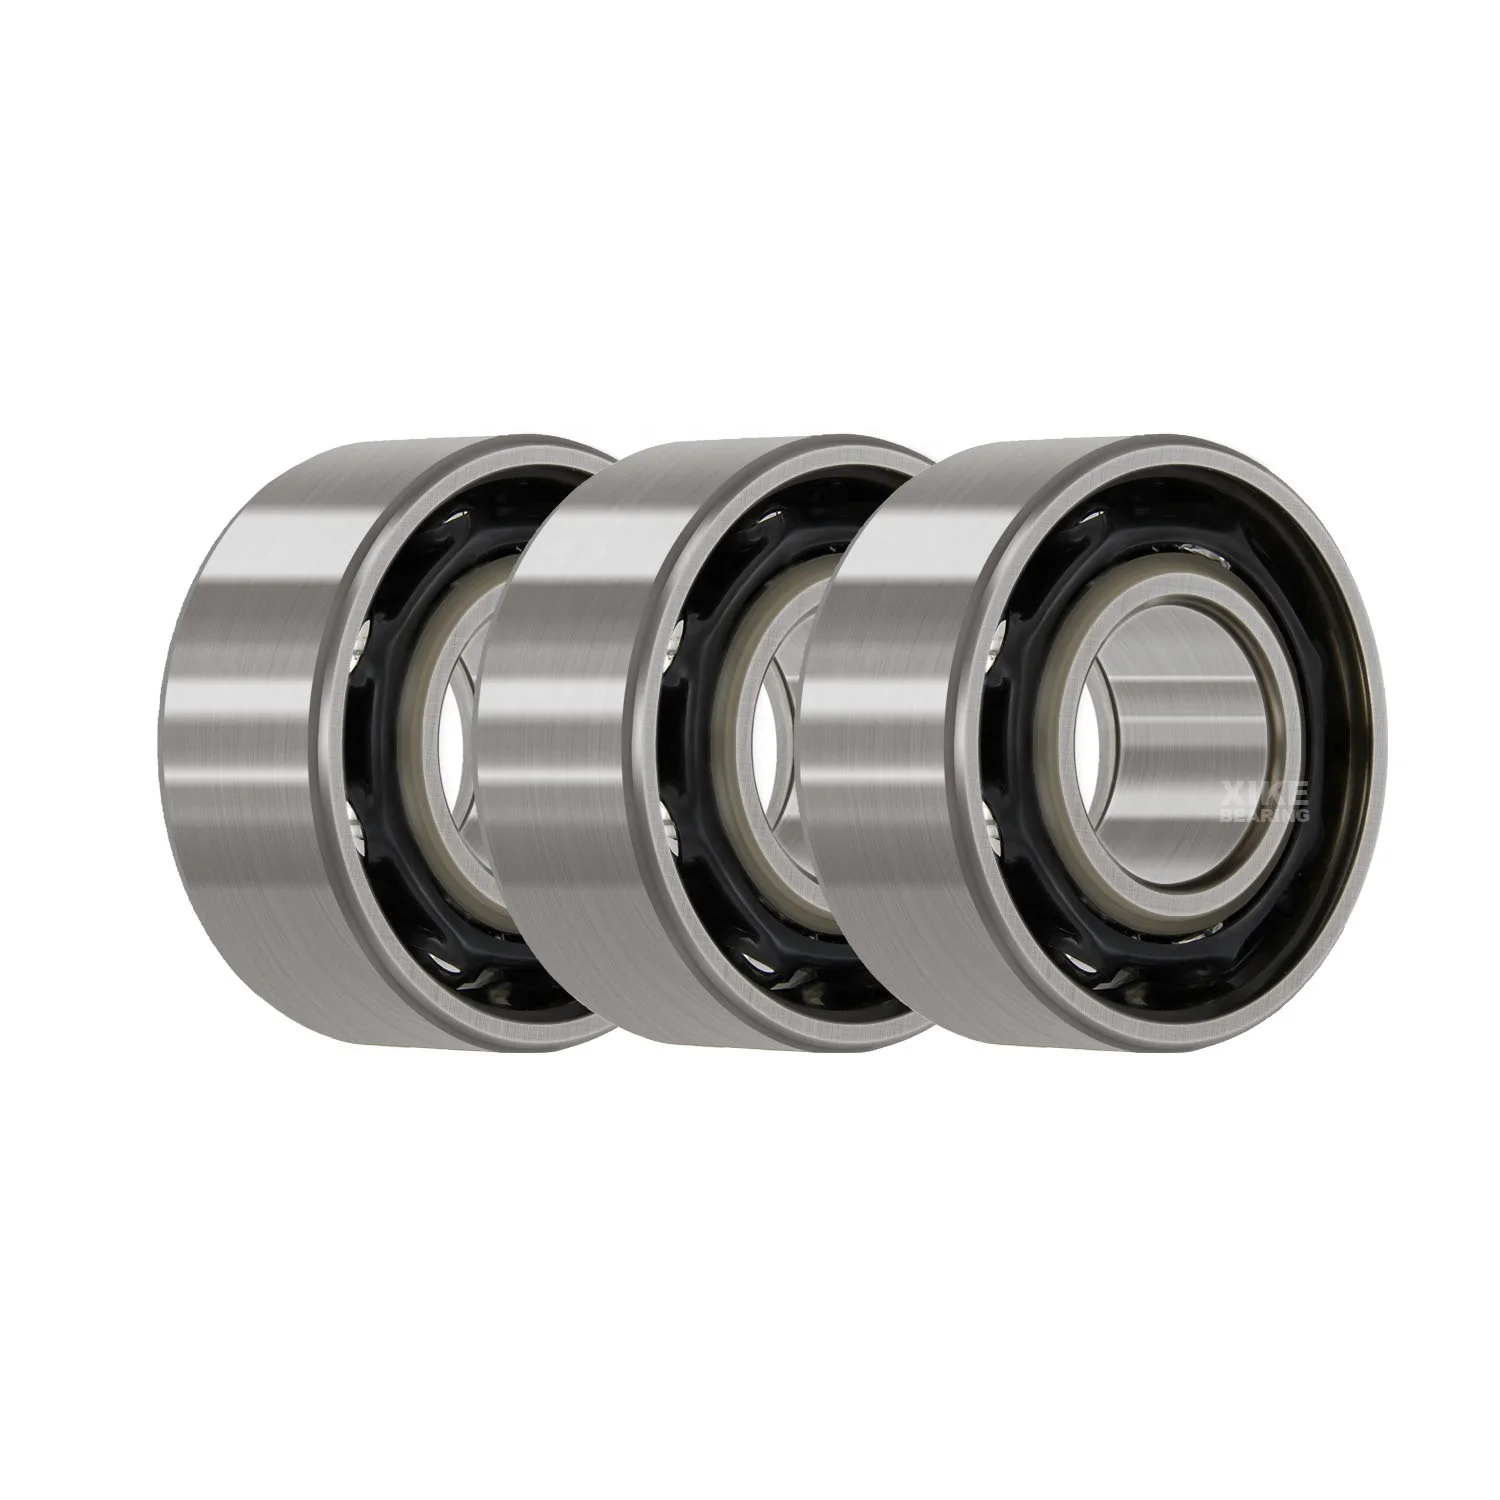 Hot Sale Double Row 3309 A Angular Contact Ball Bearing Size 45x100x39.7mm for Machine